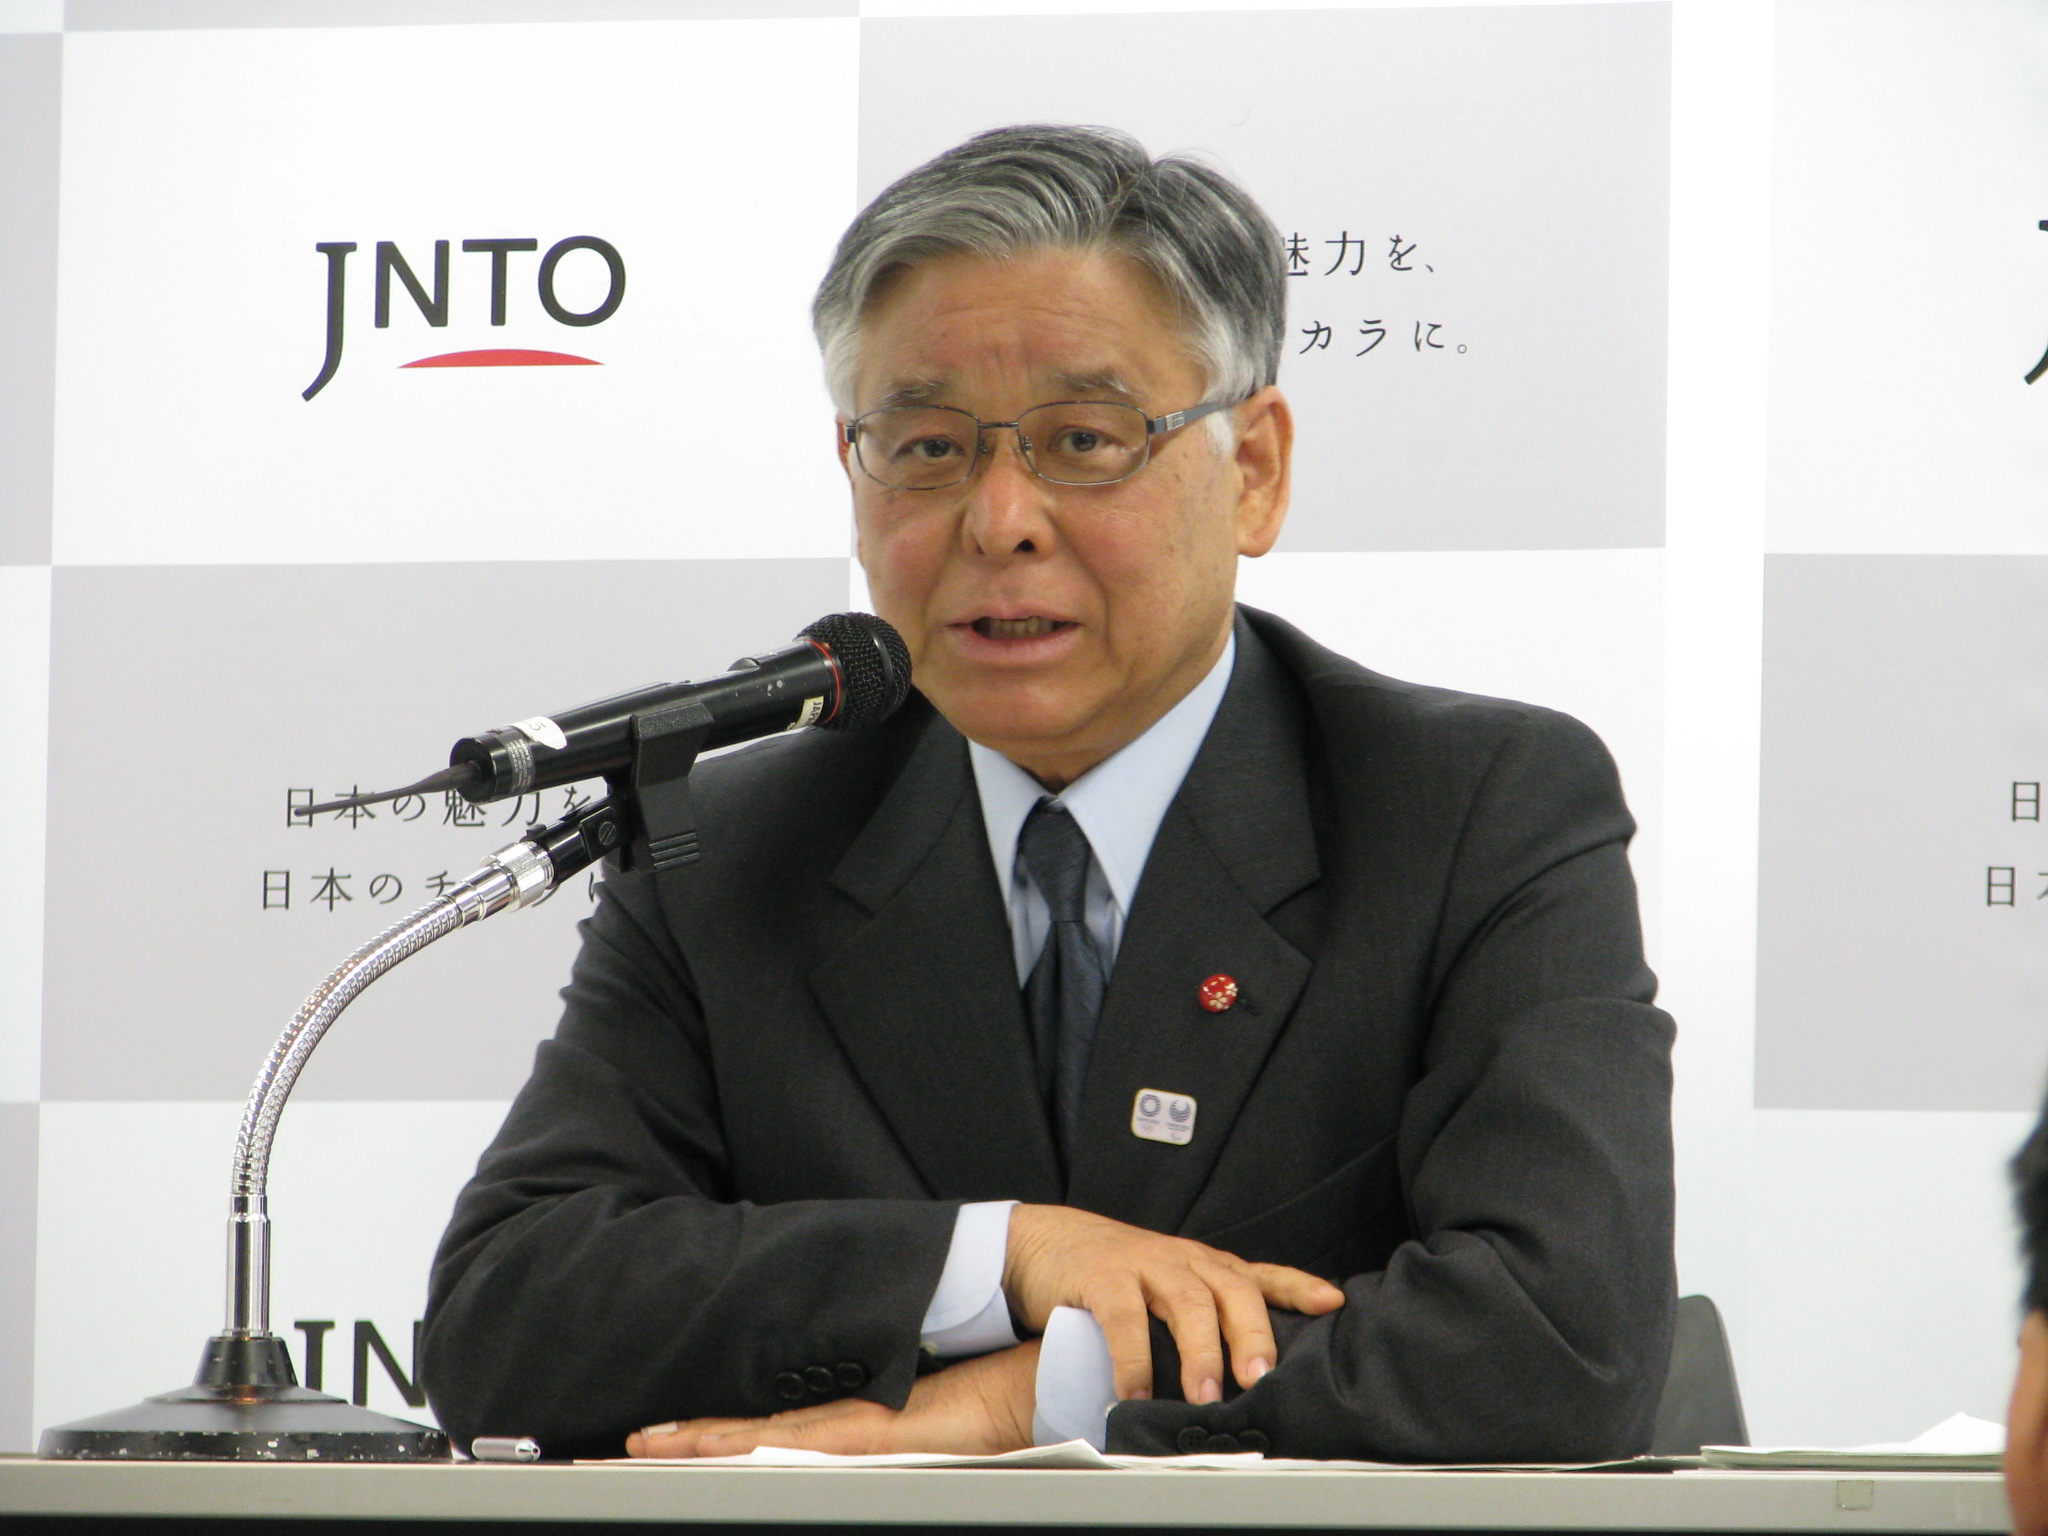 JNTO launches a new logo and a tag line toward a goal of 40 million international visitors to Japan